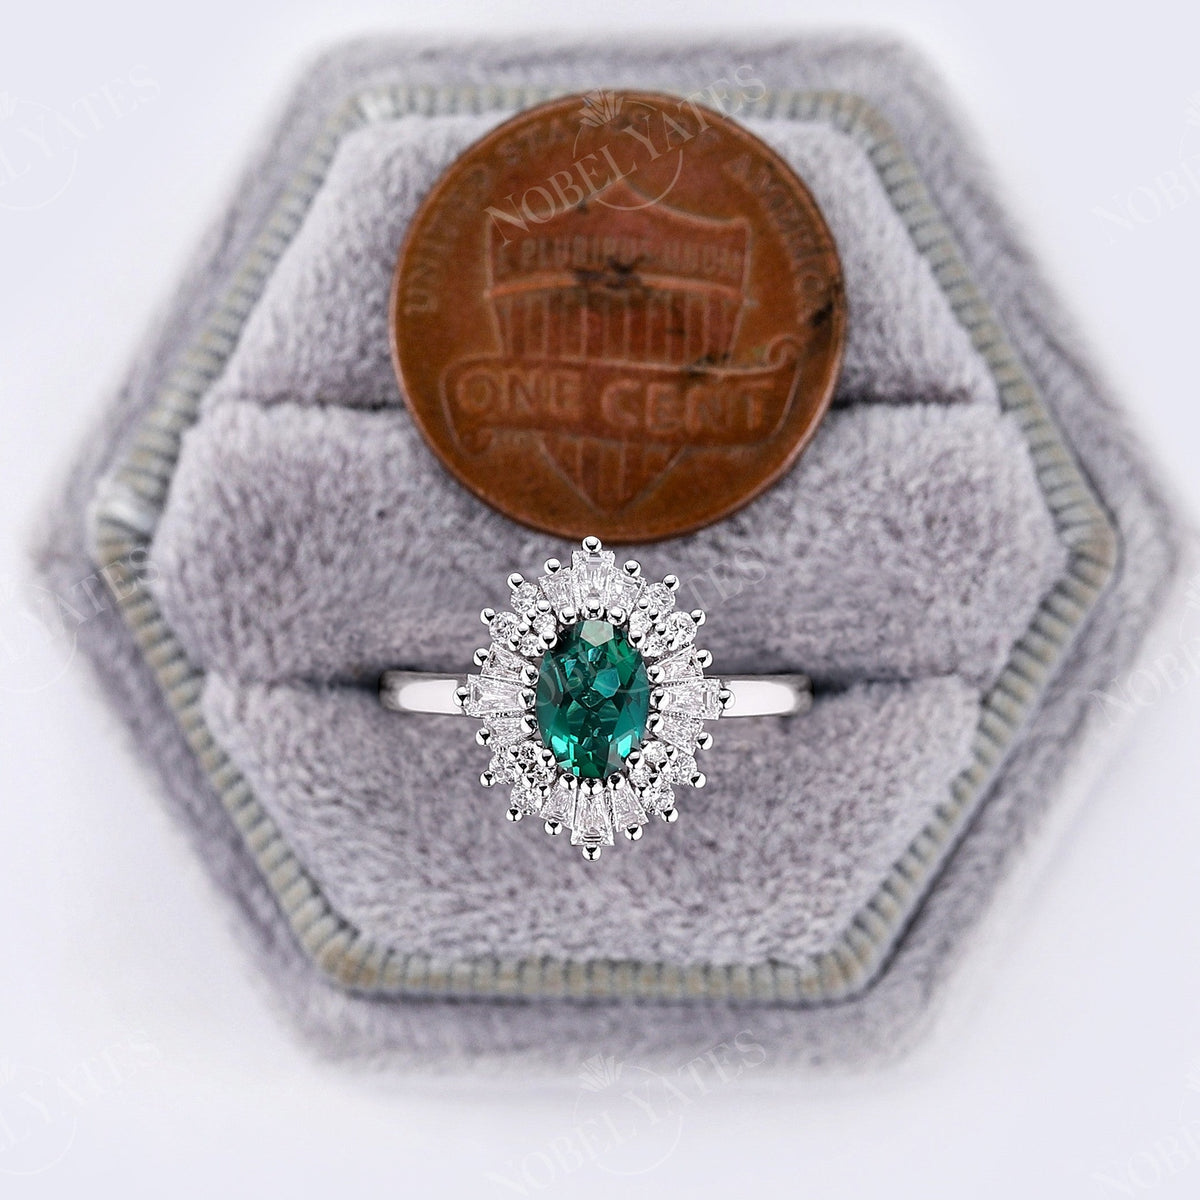 Art deco Oval Lab Emerald Halo Engagement Ring White Gold